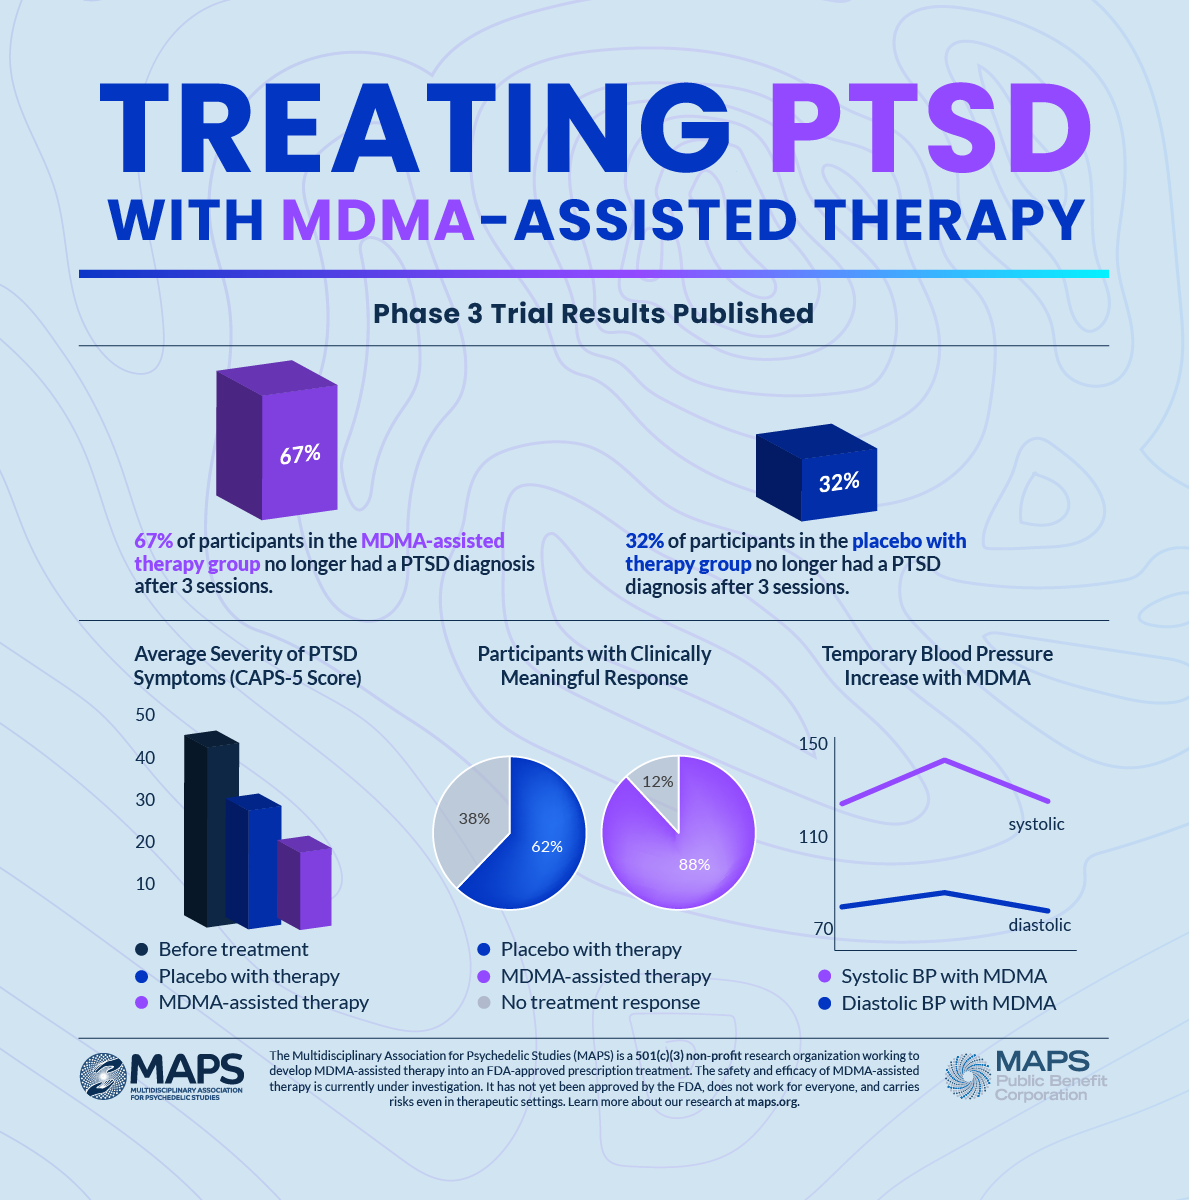 MDMA therapy with 3 sessions